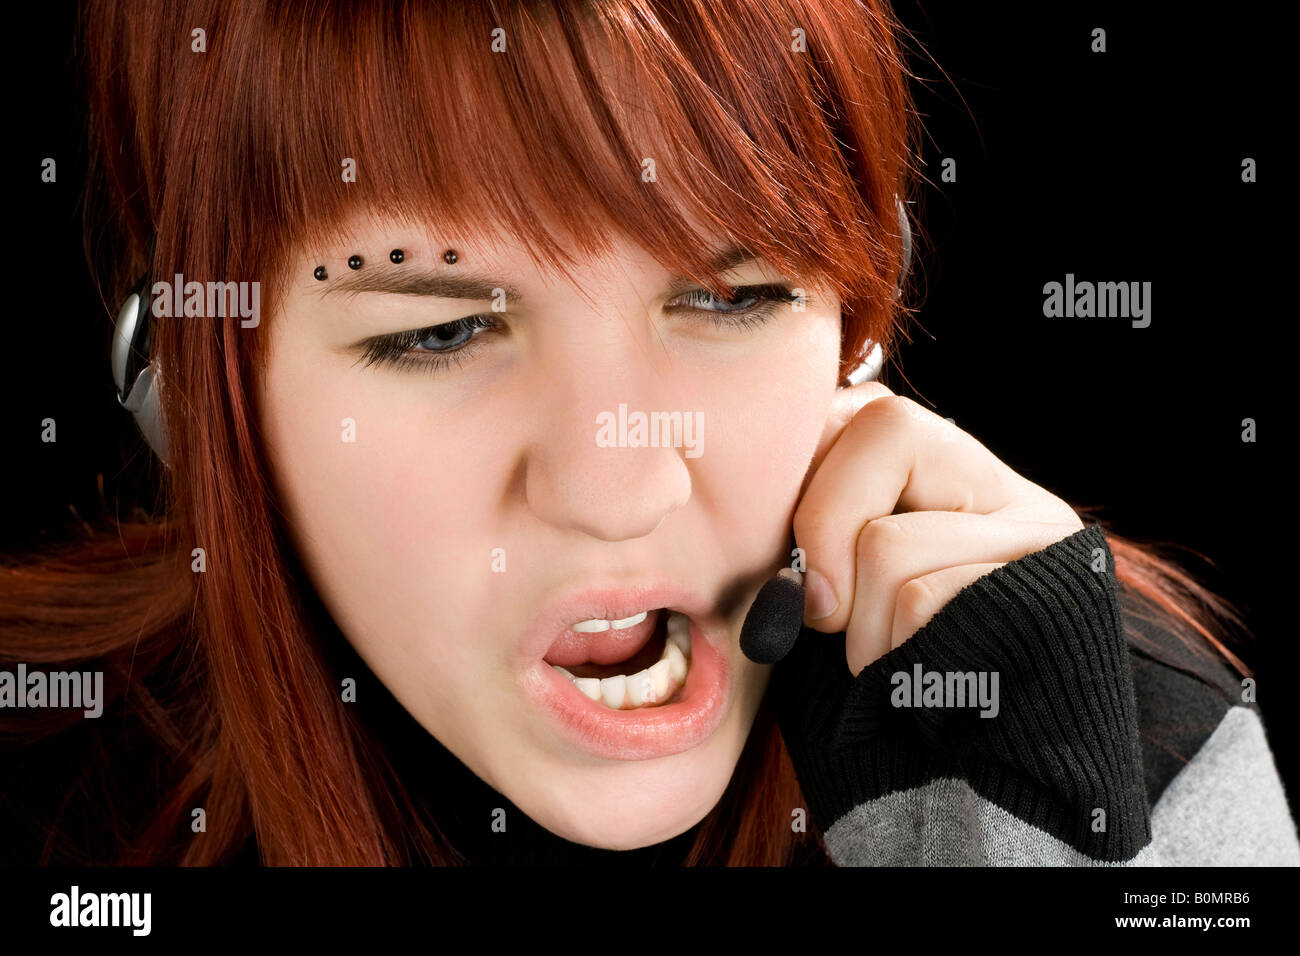 A redhead girl swearing on the microphone talking to a customer or being unpolite and stressed Studio shot Stock Photo